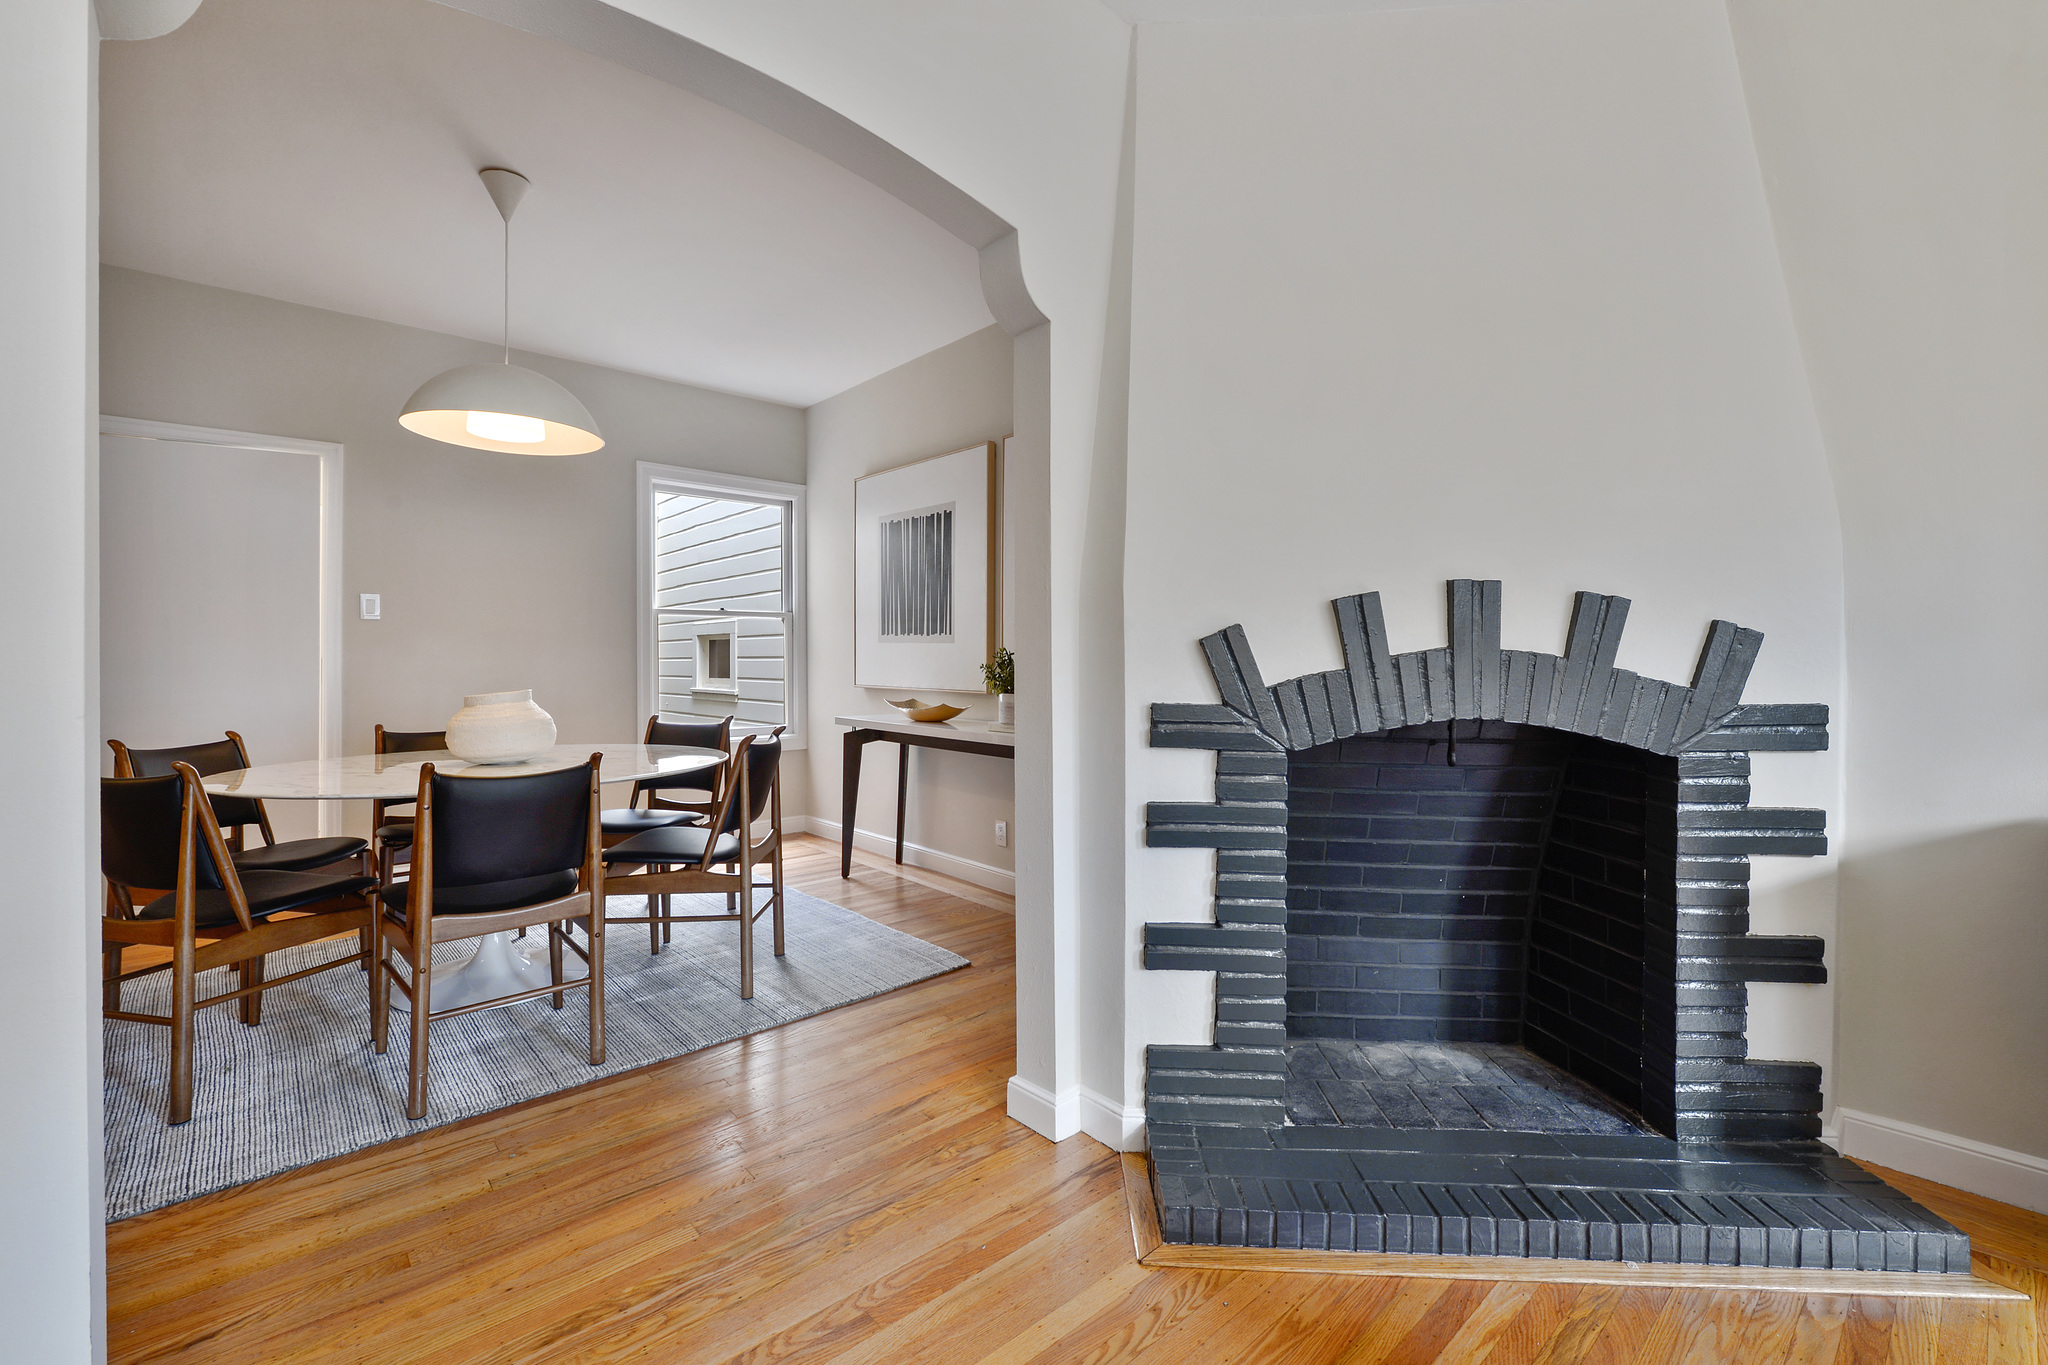 Property Photo: Close-up of ab art deco fireplace with painted brick